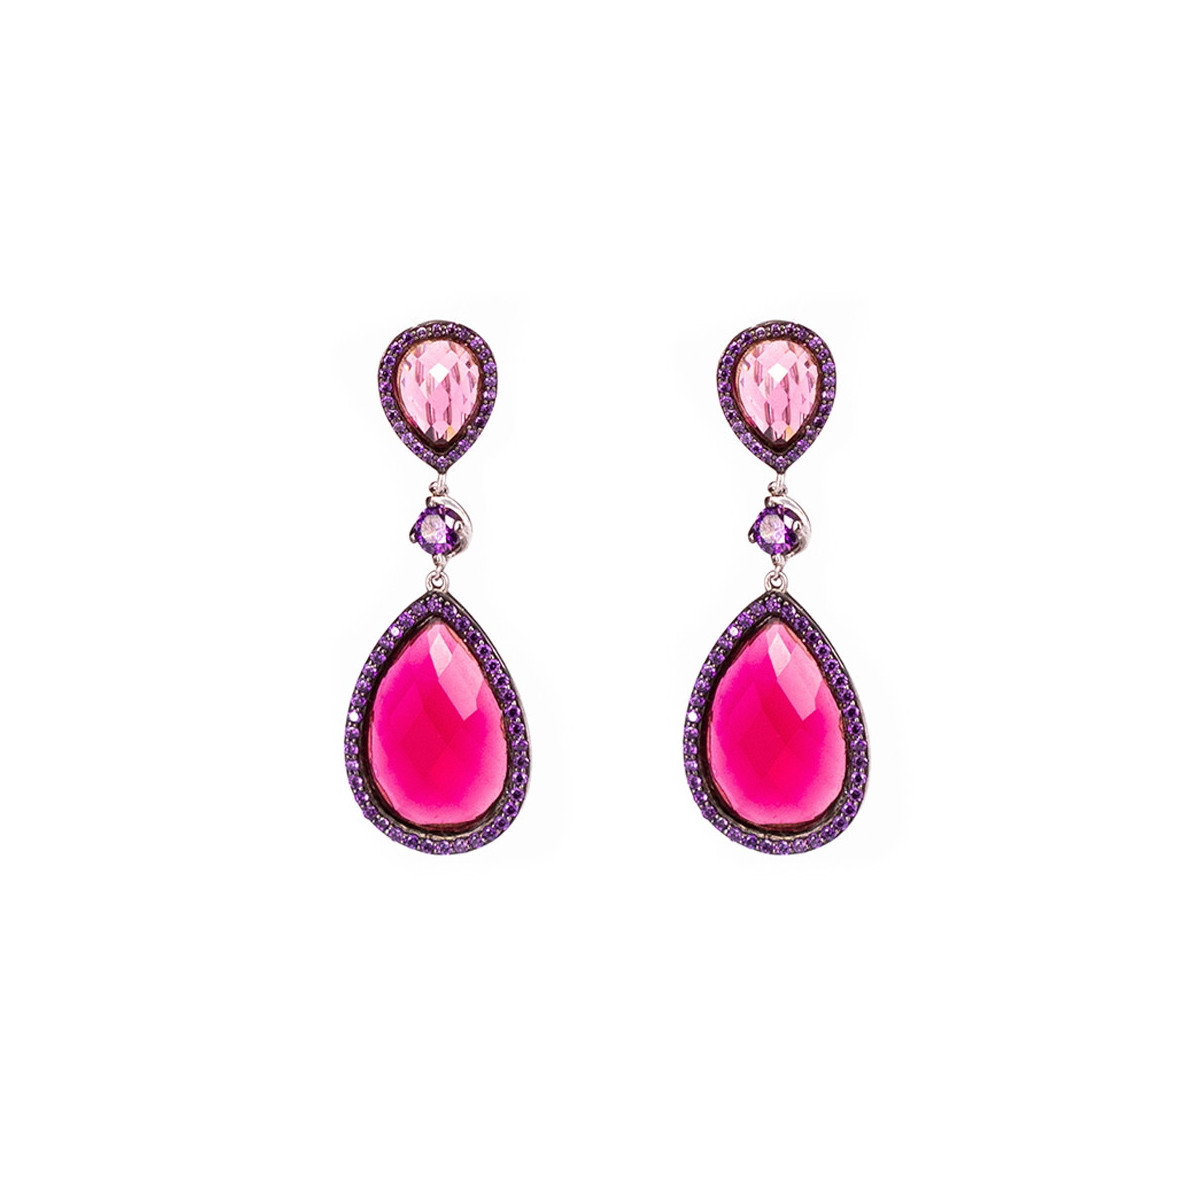 TRANSPARENT RED STONE EARRINGS